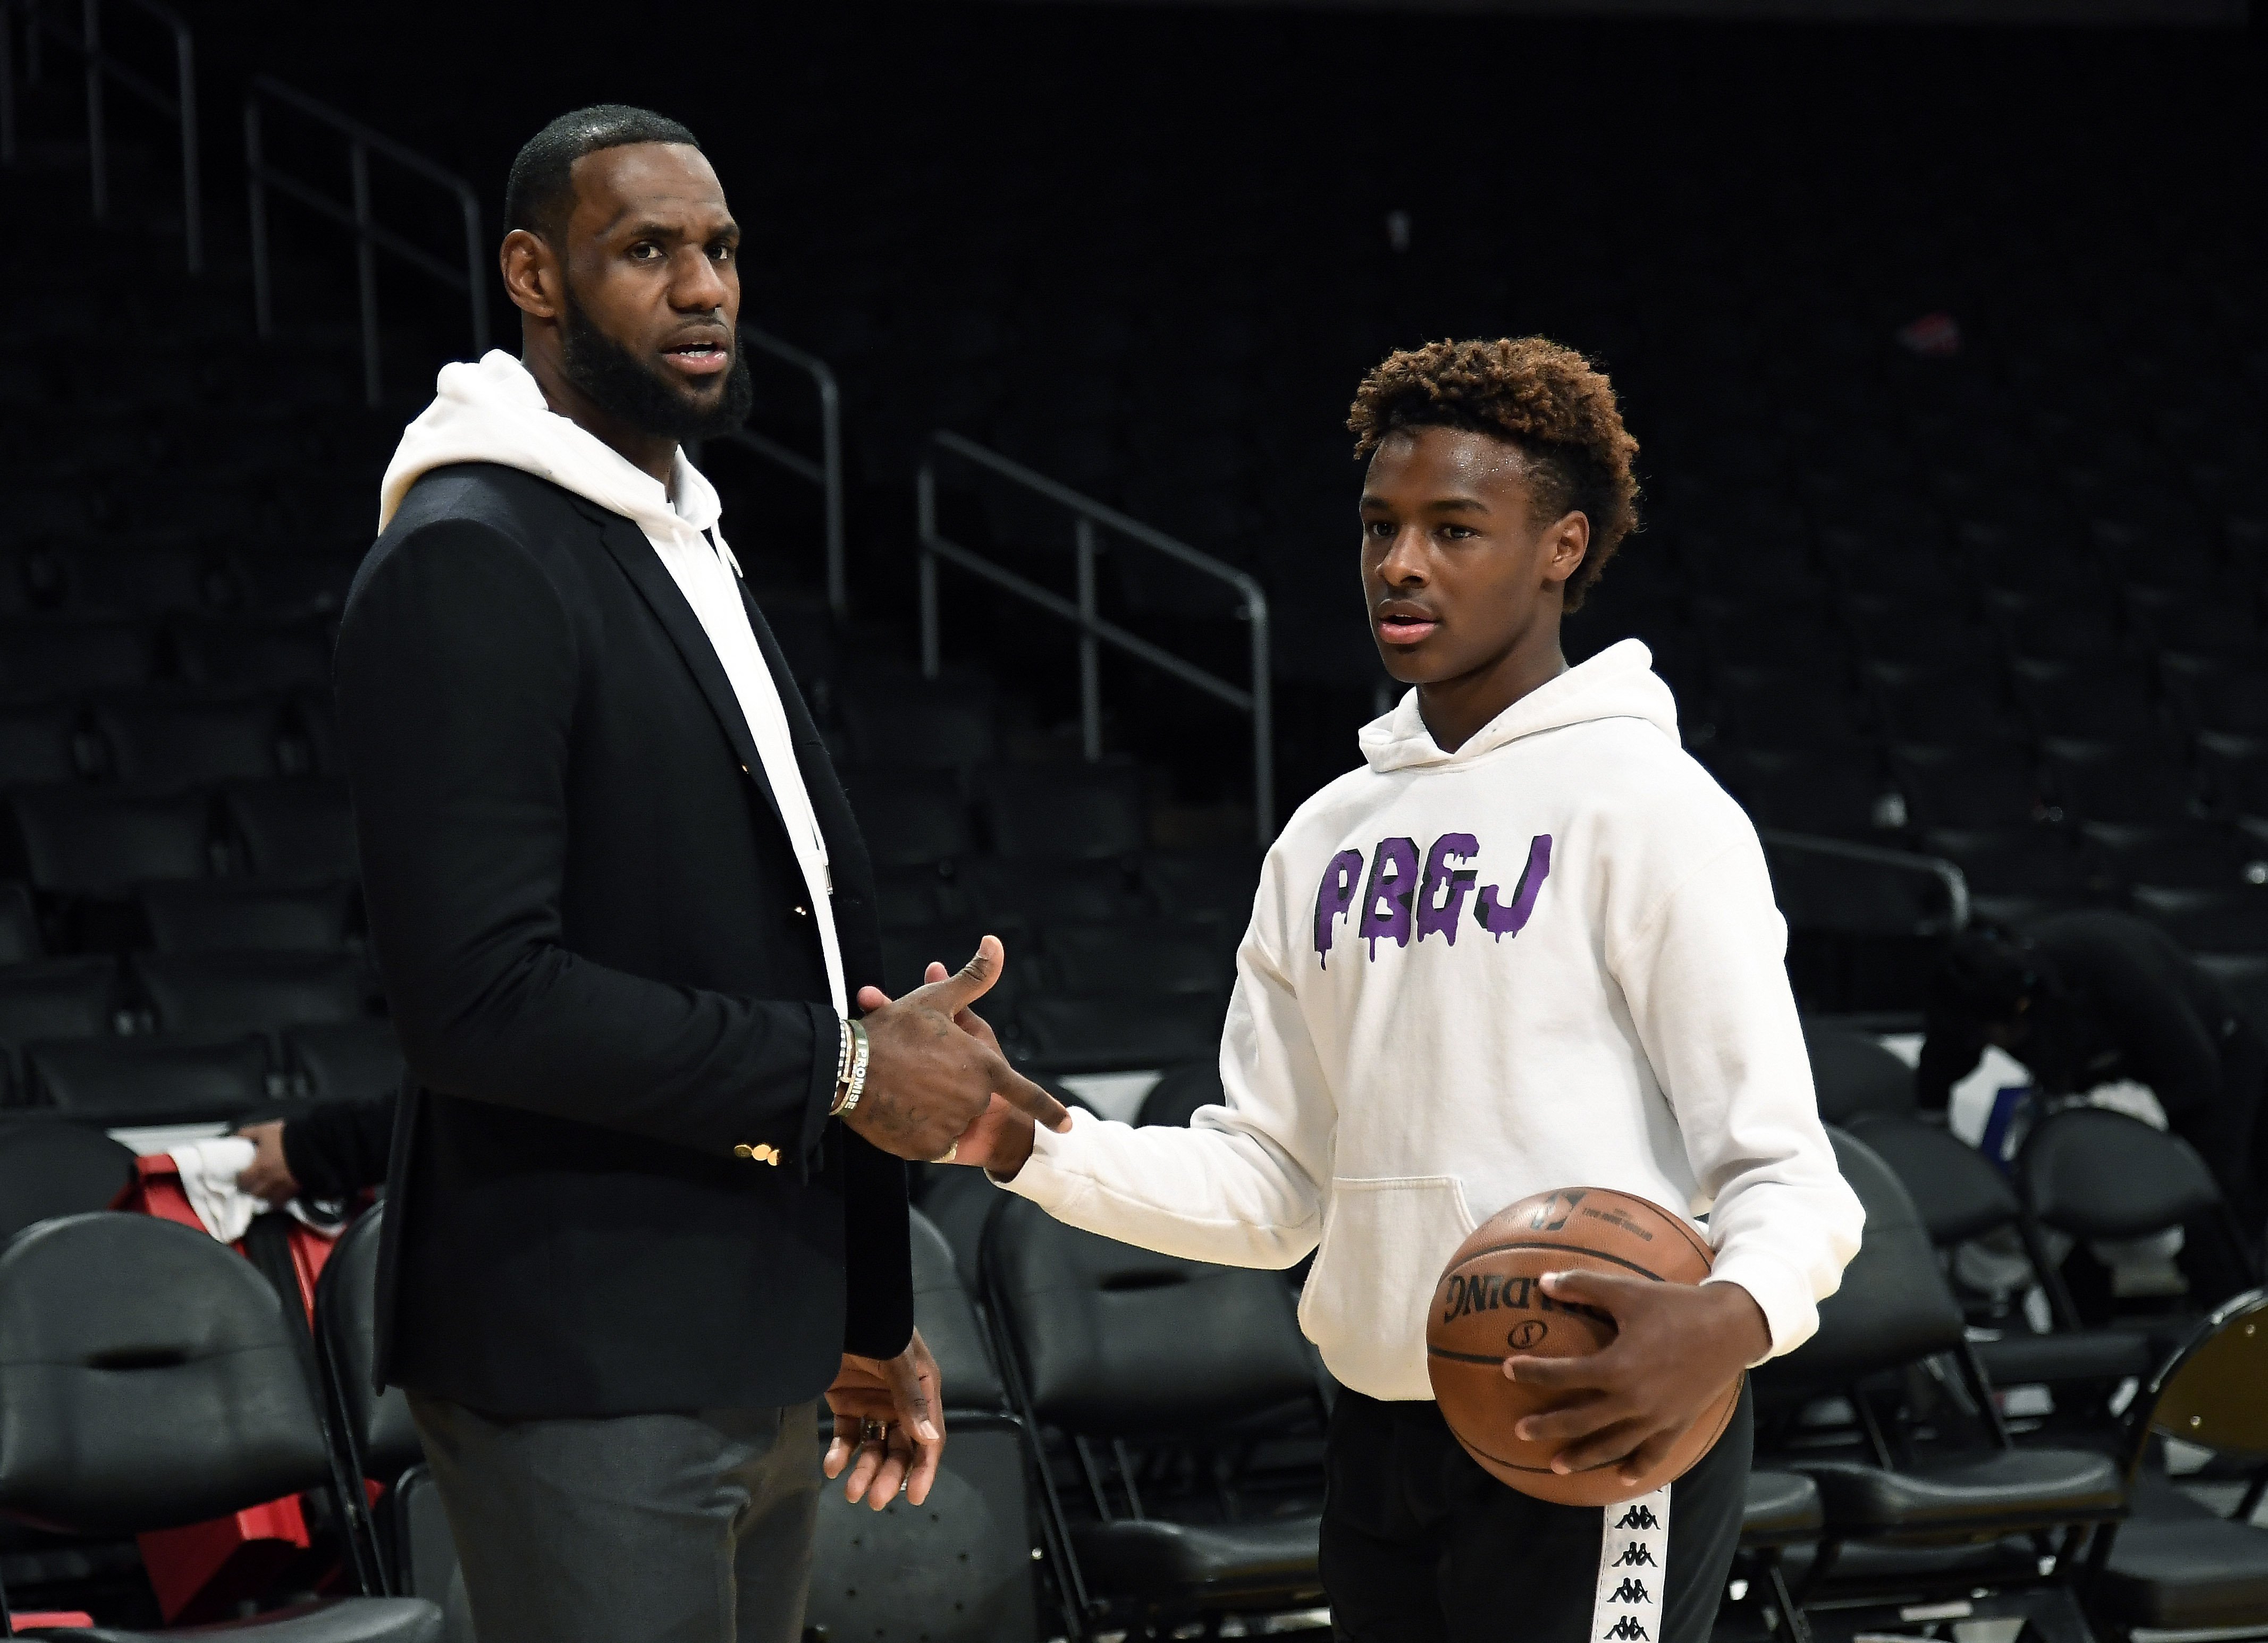 LeBron James' Son Bronny and His Teammates Pay Tribute to Kobe Bryant